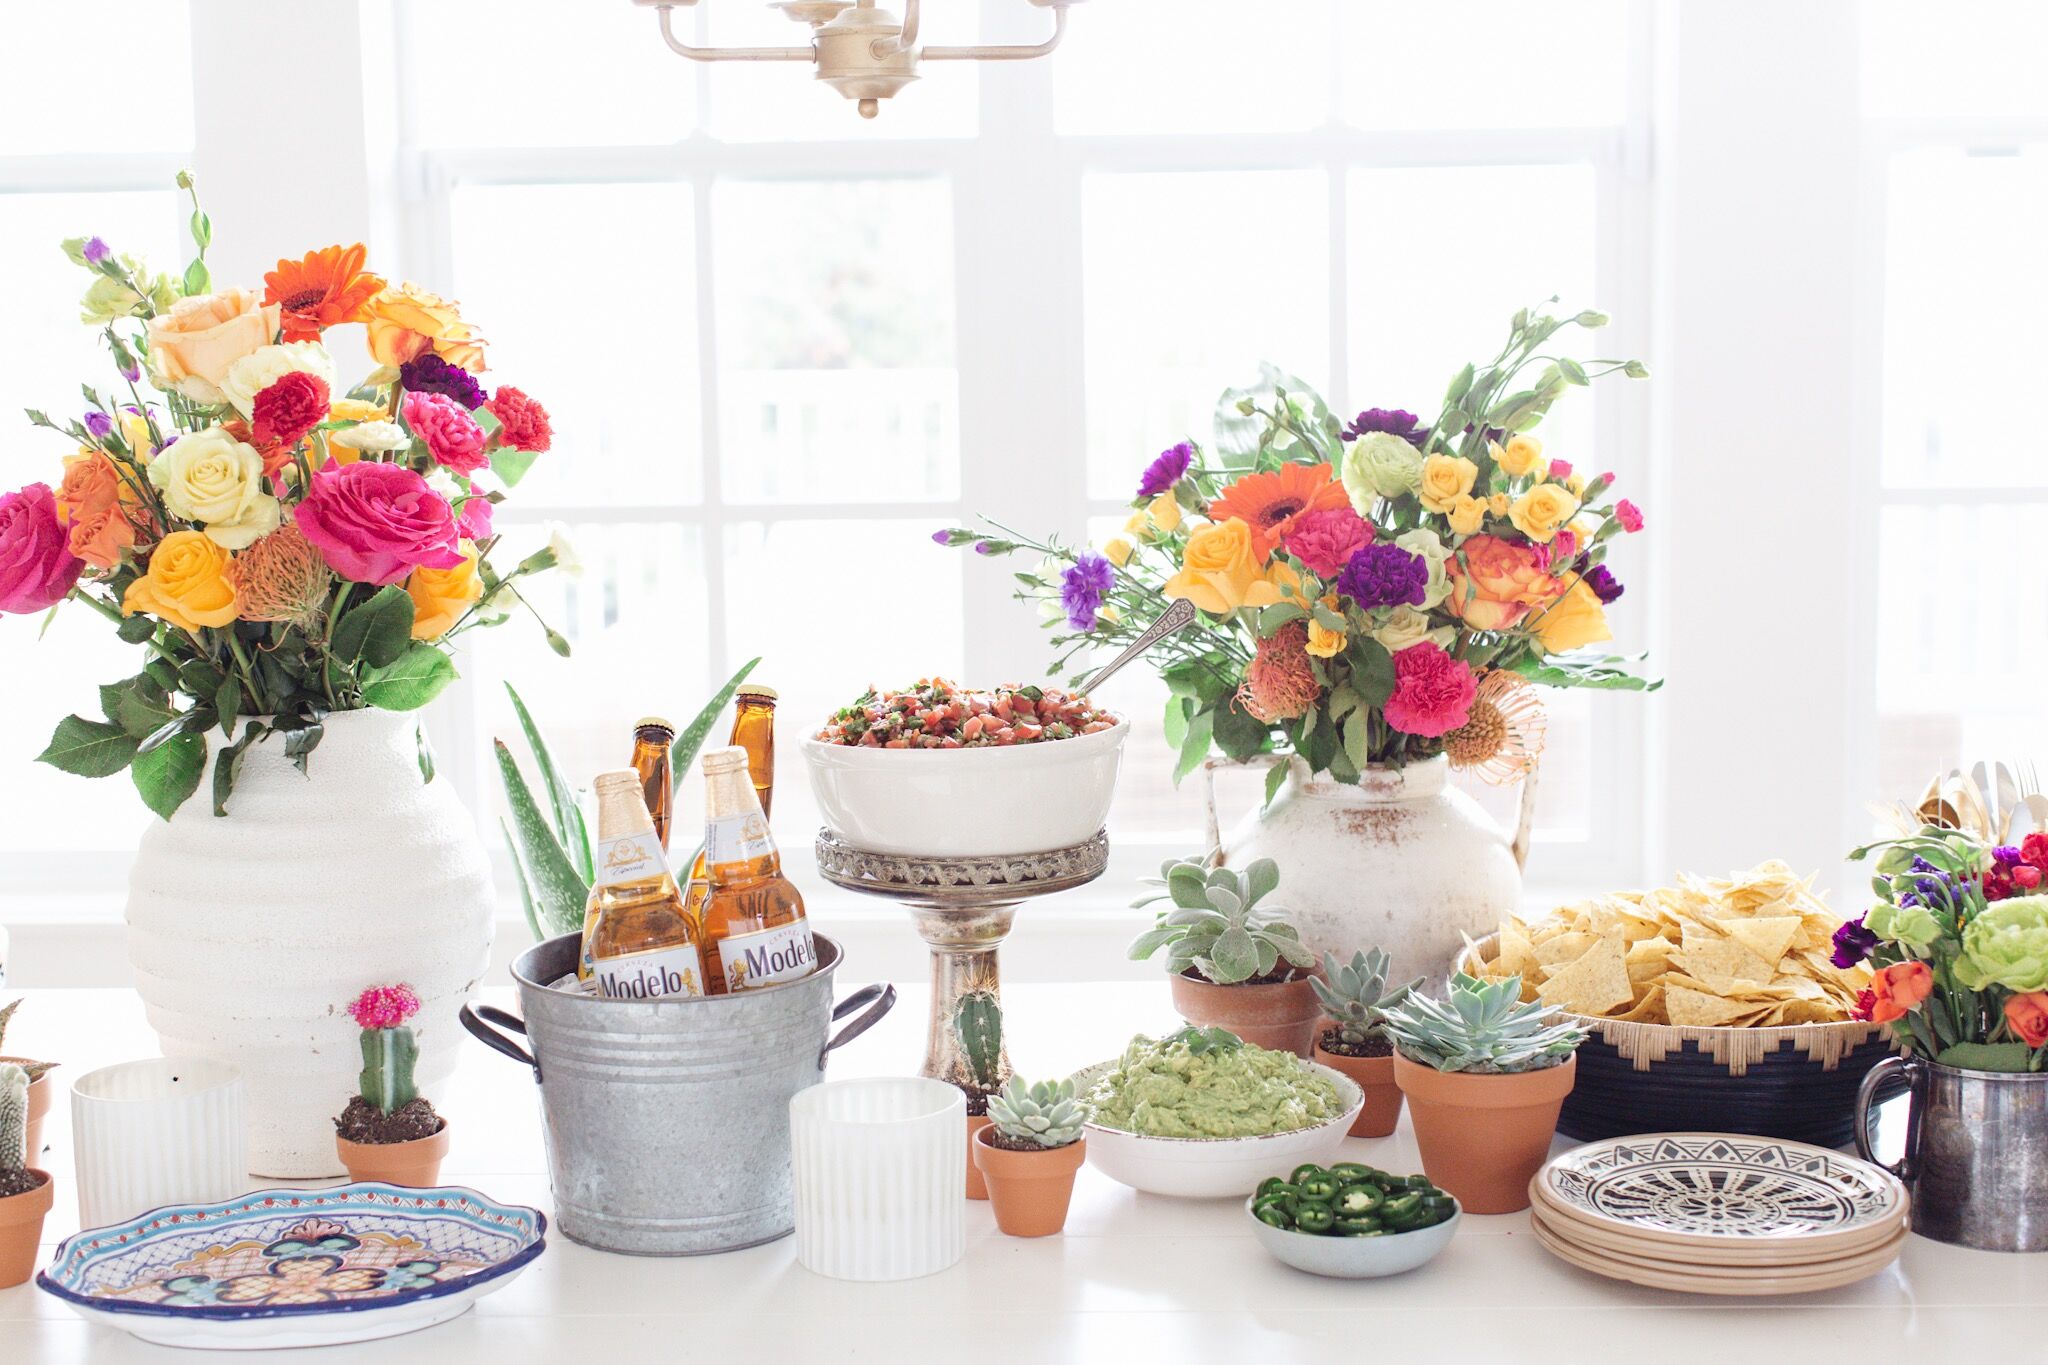 Cinco de Mayo Fraiche Table complete with a workback schedule, grocery list, menu, table setting inspiration and a tequila bar!